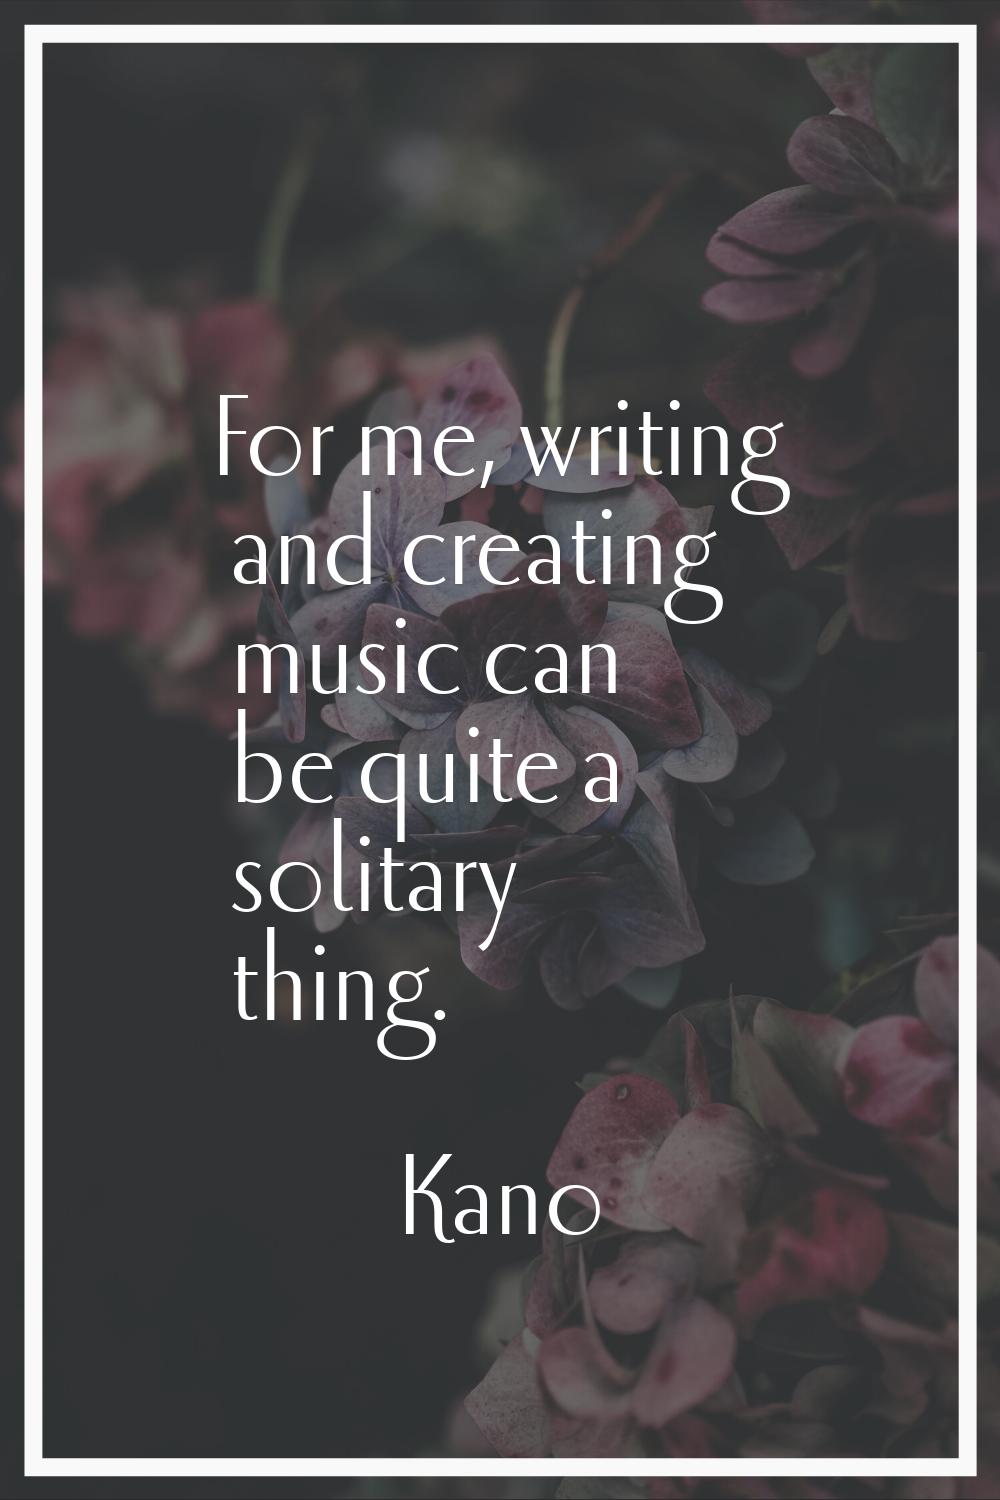 For me, writing and creating music can be quite a solitary thing.